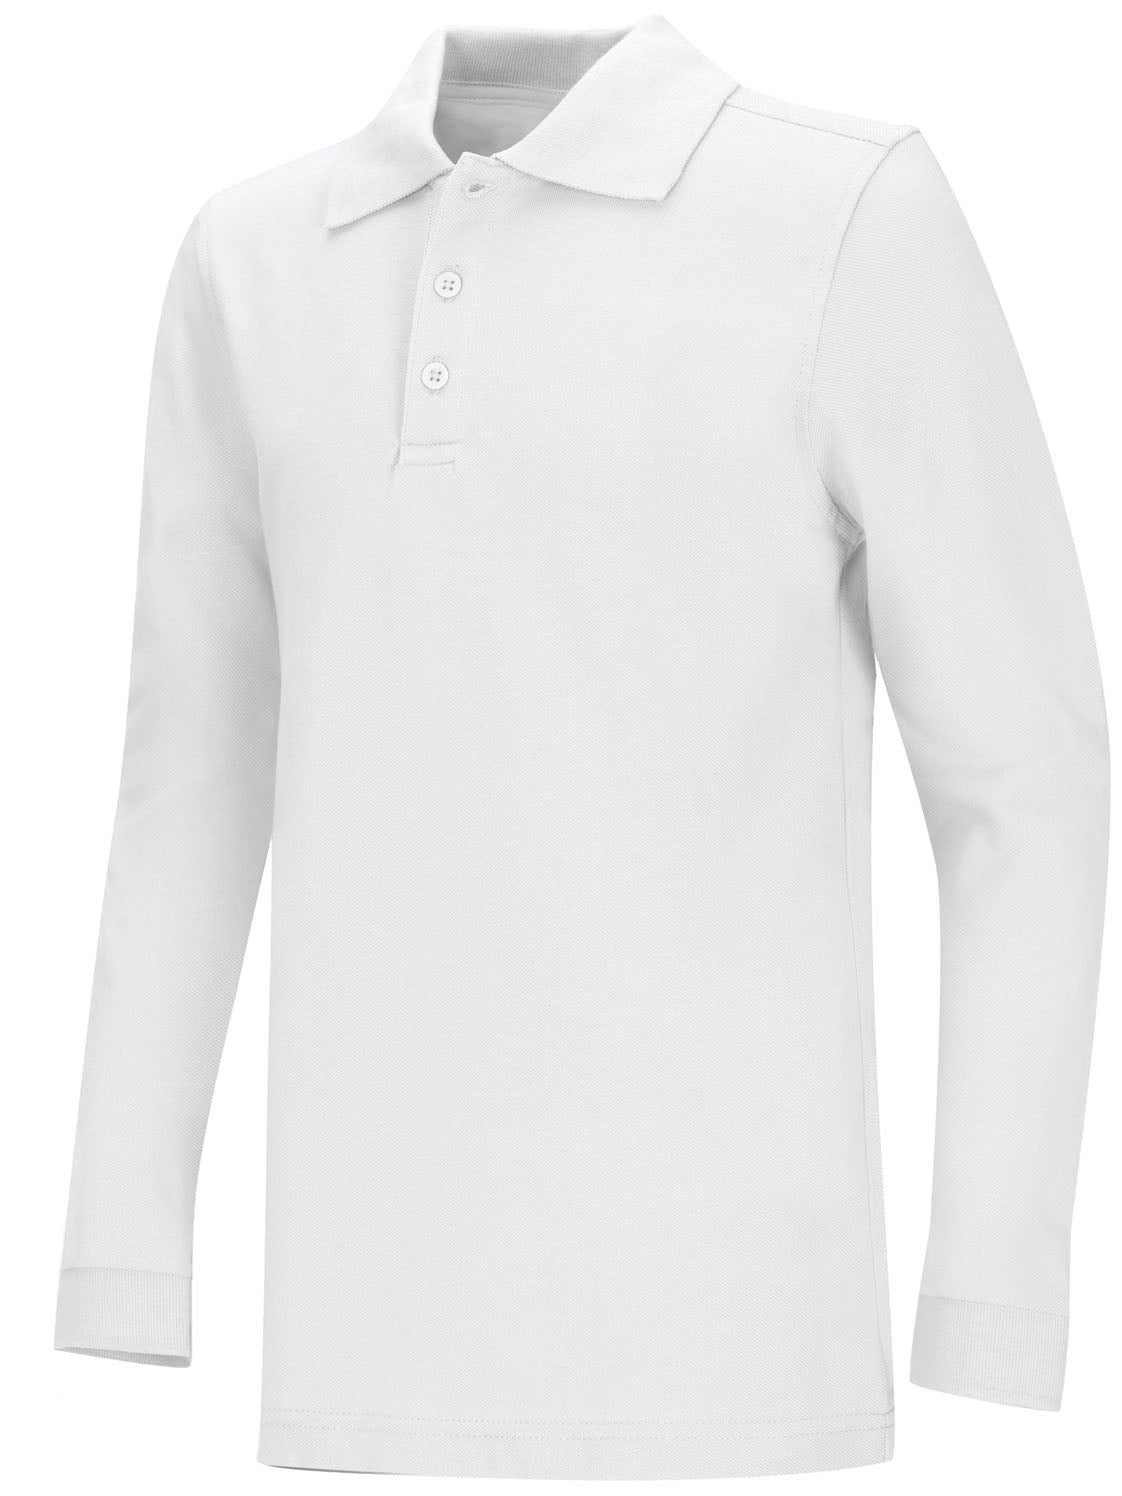 Victory -  UNISEX LONG SLEEVE PIQUE POLO #5835 - Growing Kids